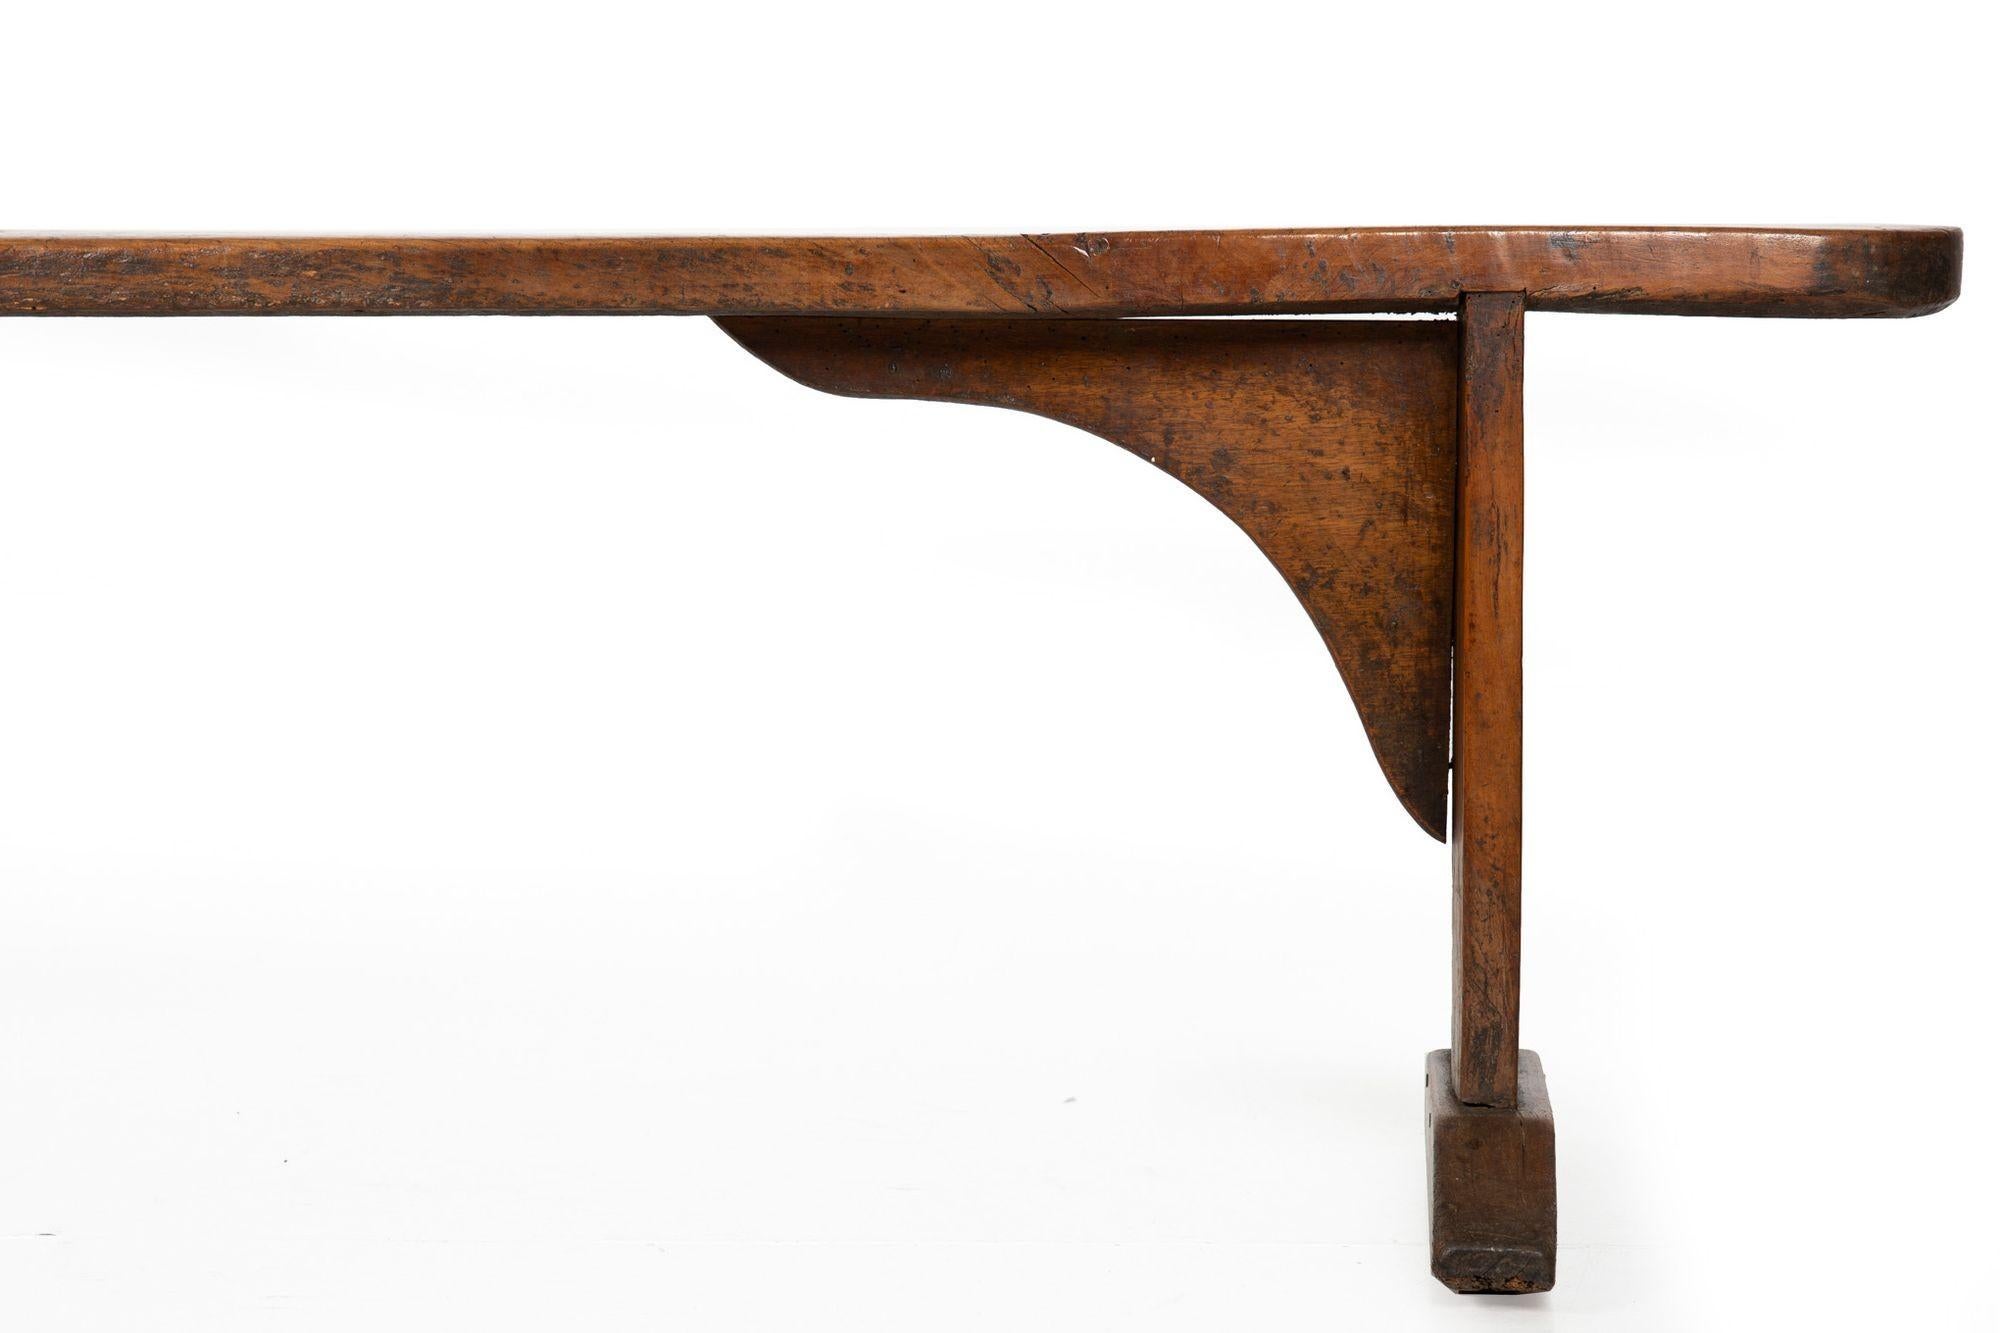 circa 1750 English Georgian Patinated and Worn Elm Trestle Bench For Sale 3